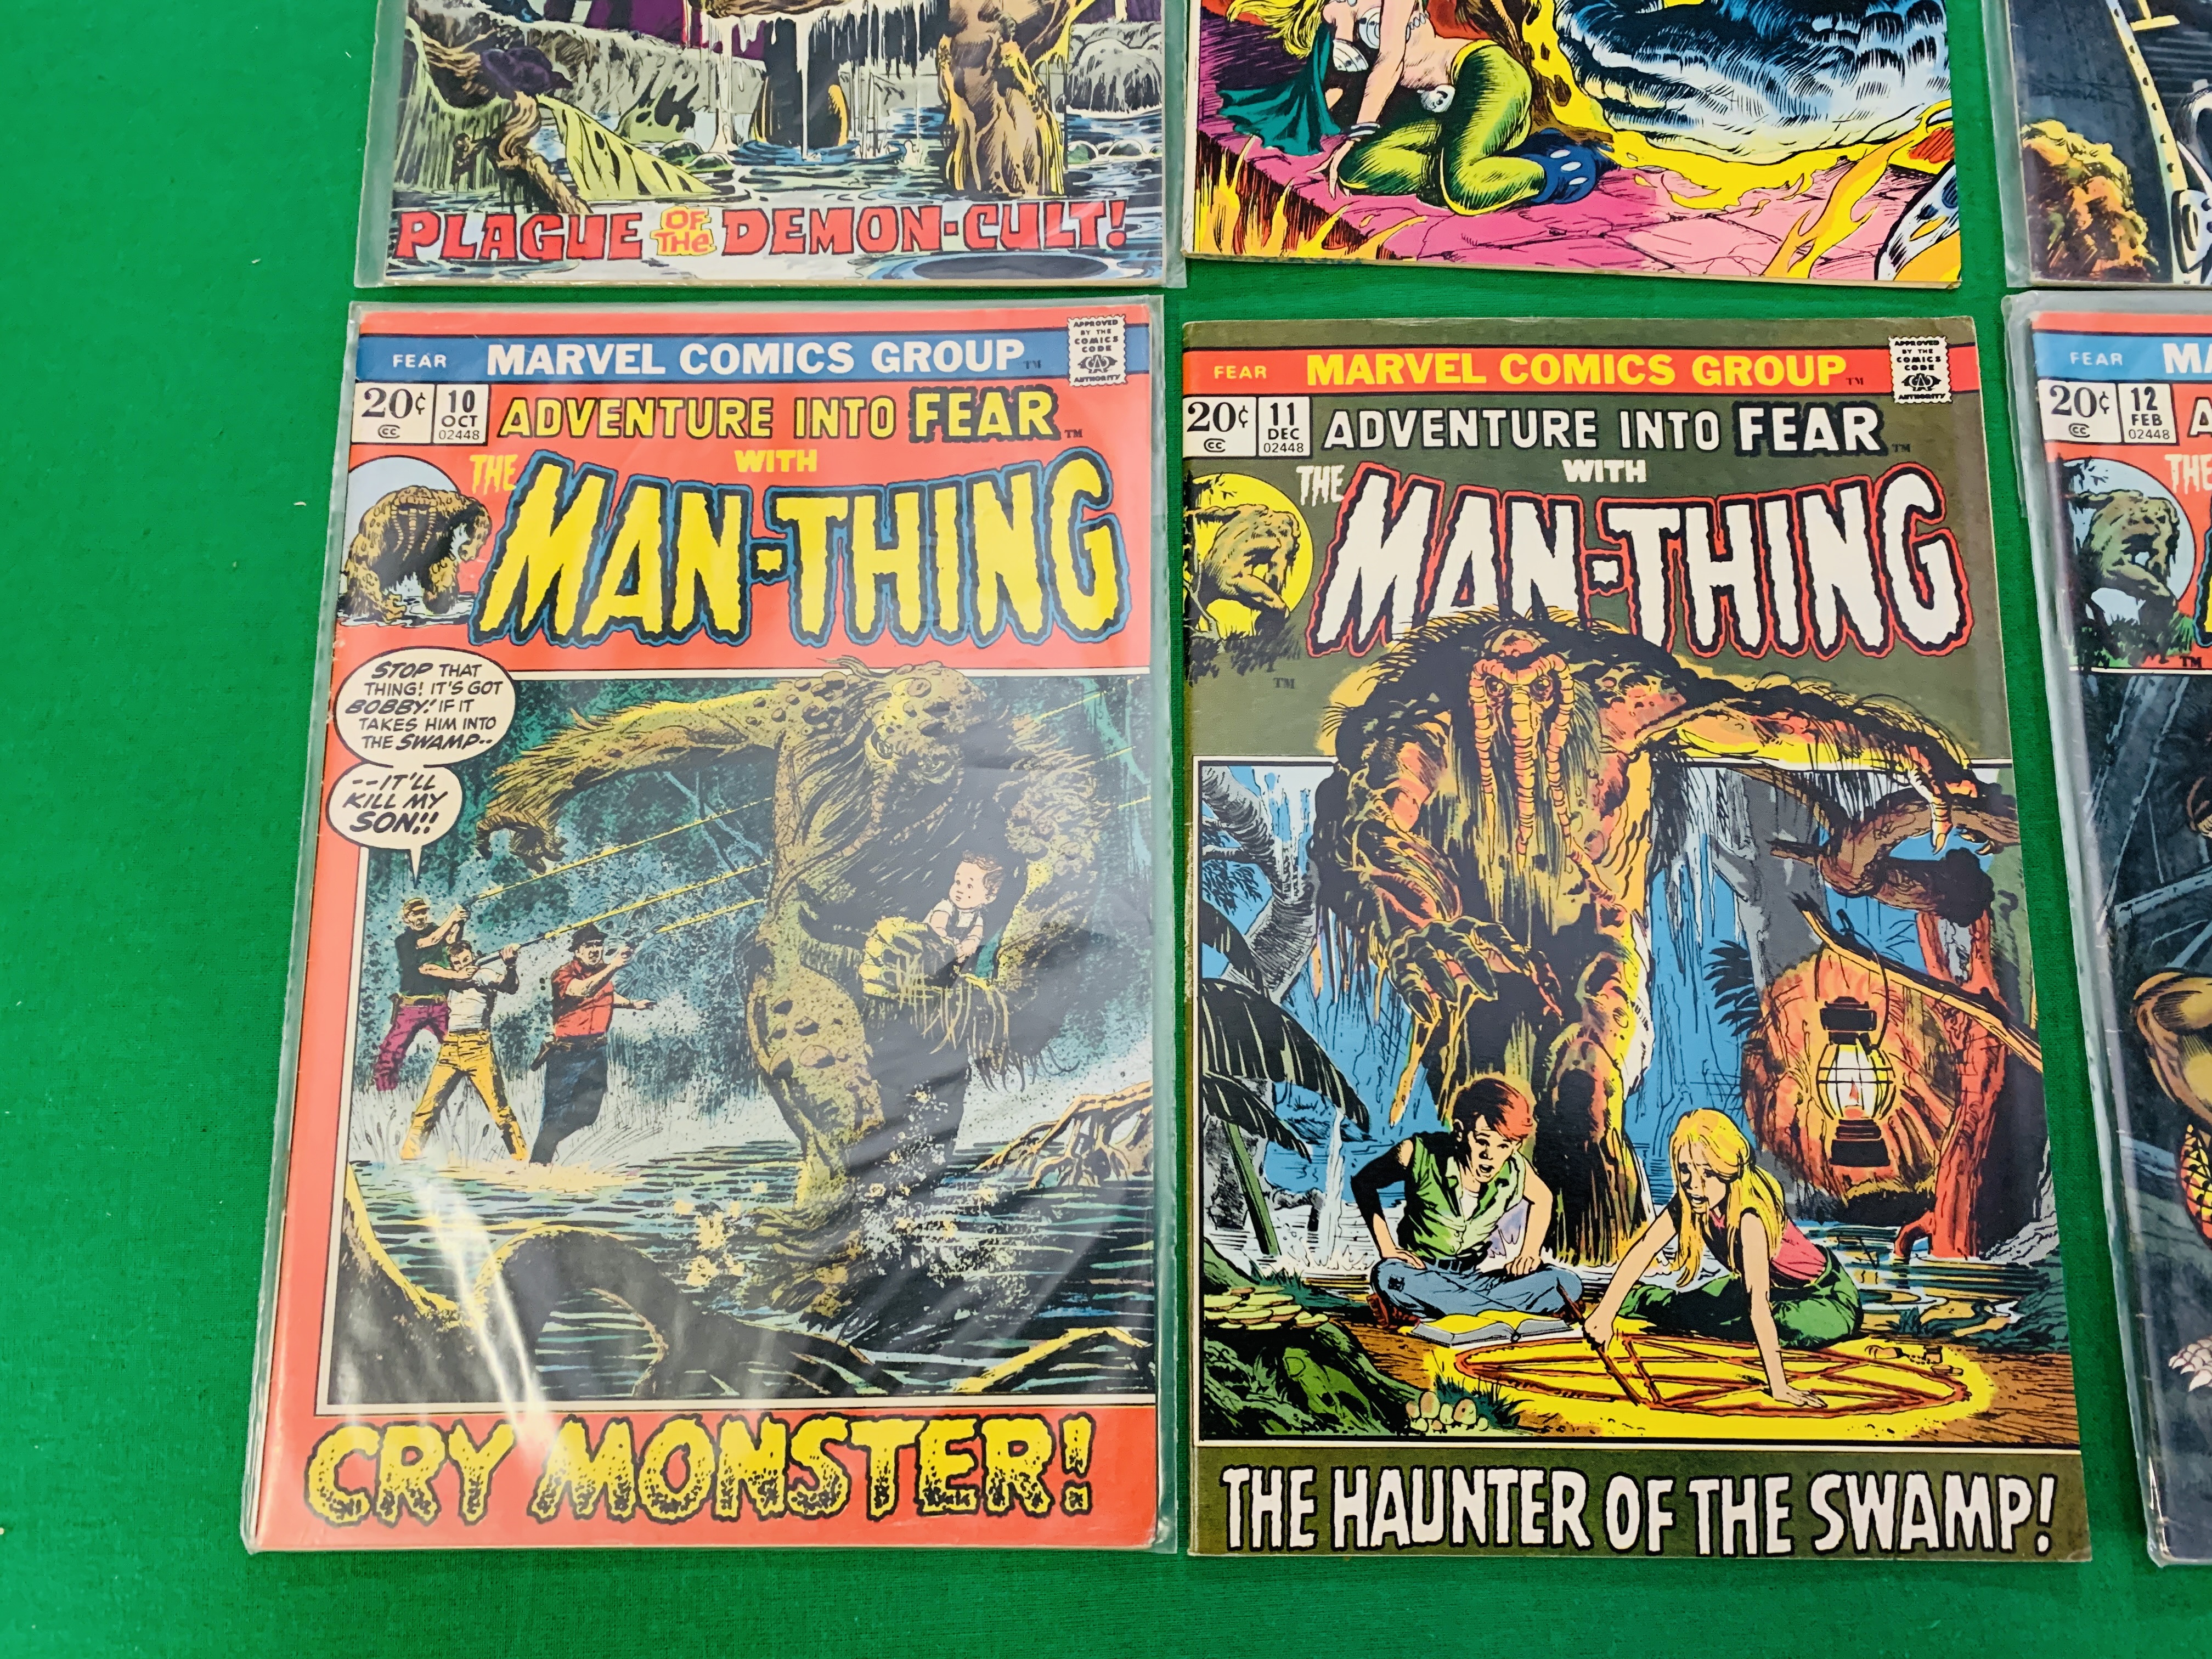 MARVEL COMICS ADVENTURE INTO FEAR WITH MAN-THING NO. 10 - 17, 19, FROM 1973. NO 19. - Image 2 of 6